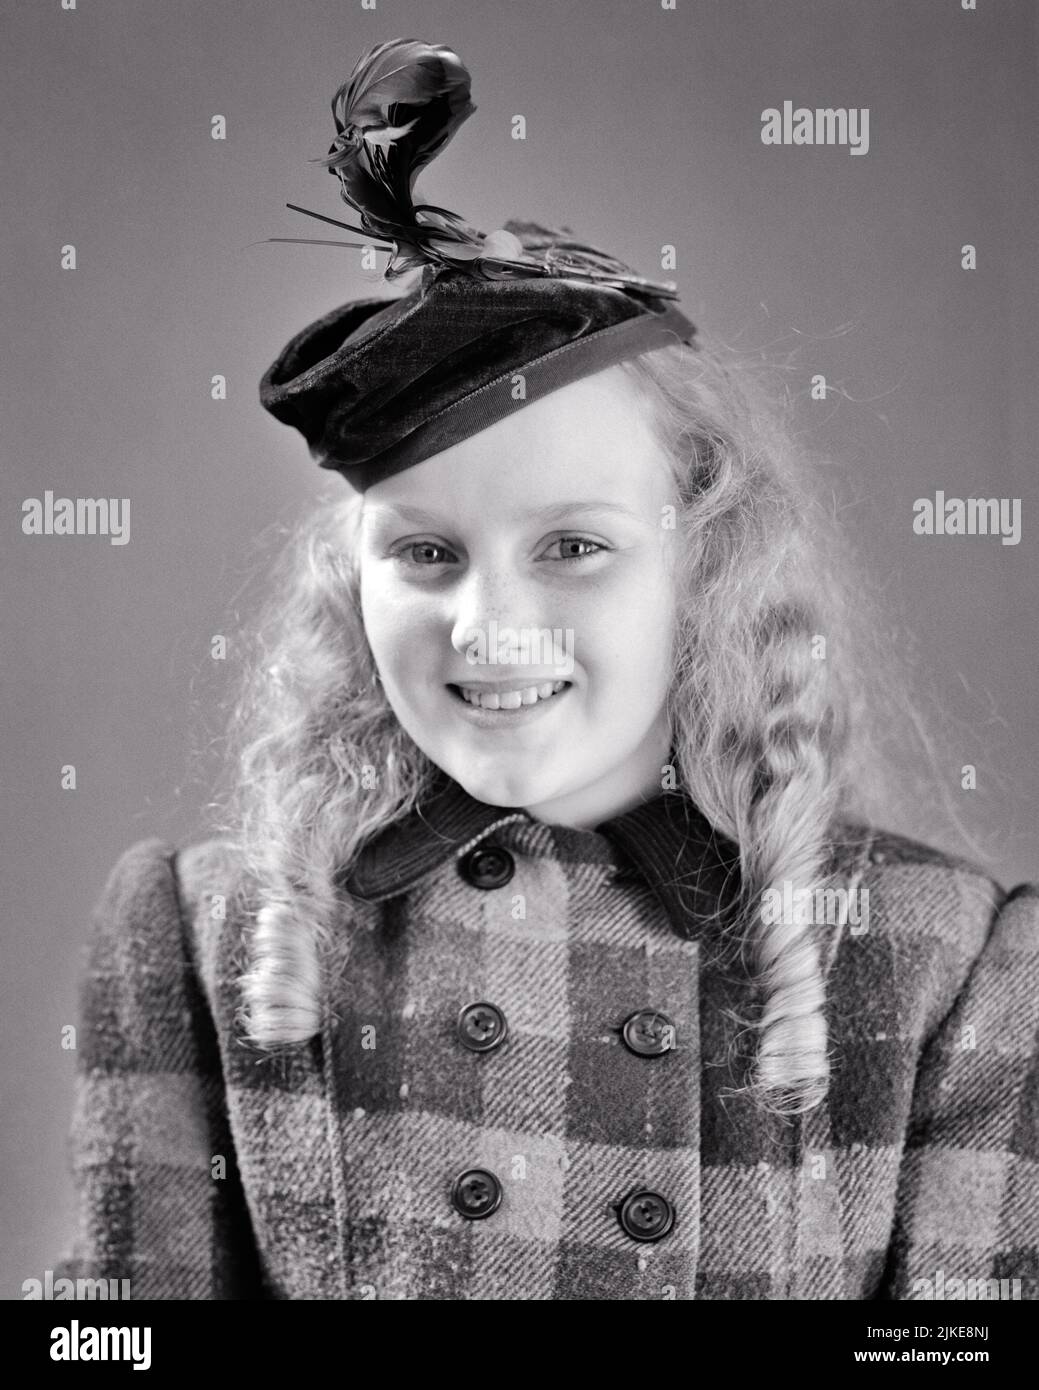 1940s SMILING YOUNG BLONDE GIRL WEARING SILLY HAT WITH FEATHER LONG HAIR IN BALONEY CURLS PLAID DOUBLE BREASTED WOOLEN COAT - j9203 HAR001 HARS STUDIO SHOT HEALTHINESS COPY SPACE HALF-LENGTH PLAID FRECKLES CONFIDENCE B&W EYE CONTACT HAPPINESS CHEERFUL STYLES CURLS PRIDE SMILES JOYFUL STYLISH WOOLEN BALONEY BREASTED FASHIONS GROWTH JUVENILES PRE-TEEN PRE-TEEN GIRL BLACK AND WHITE CAUCASIAN ETHNICITY HAR001 OLD FASHIONED Stock Photo